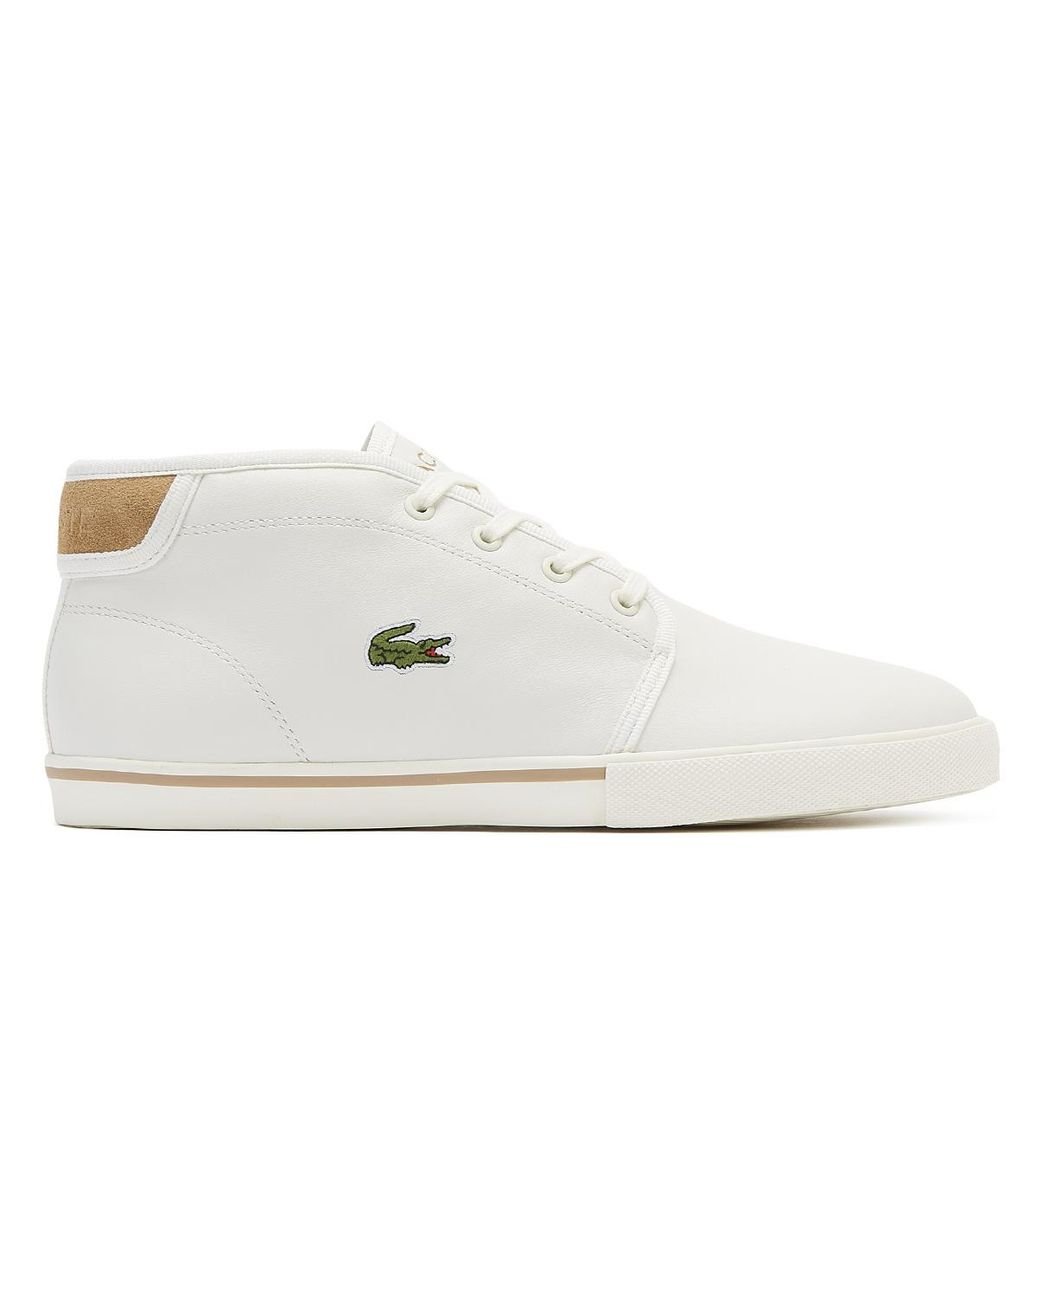 Lacoste Mens Ampthill 319 1 CMA Trainers